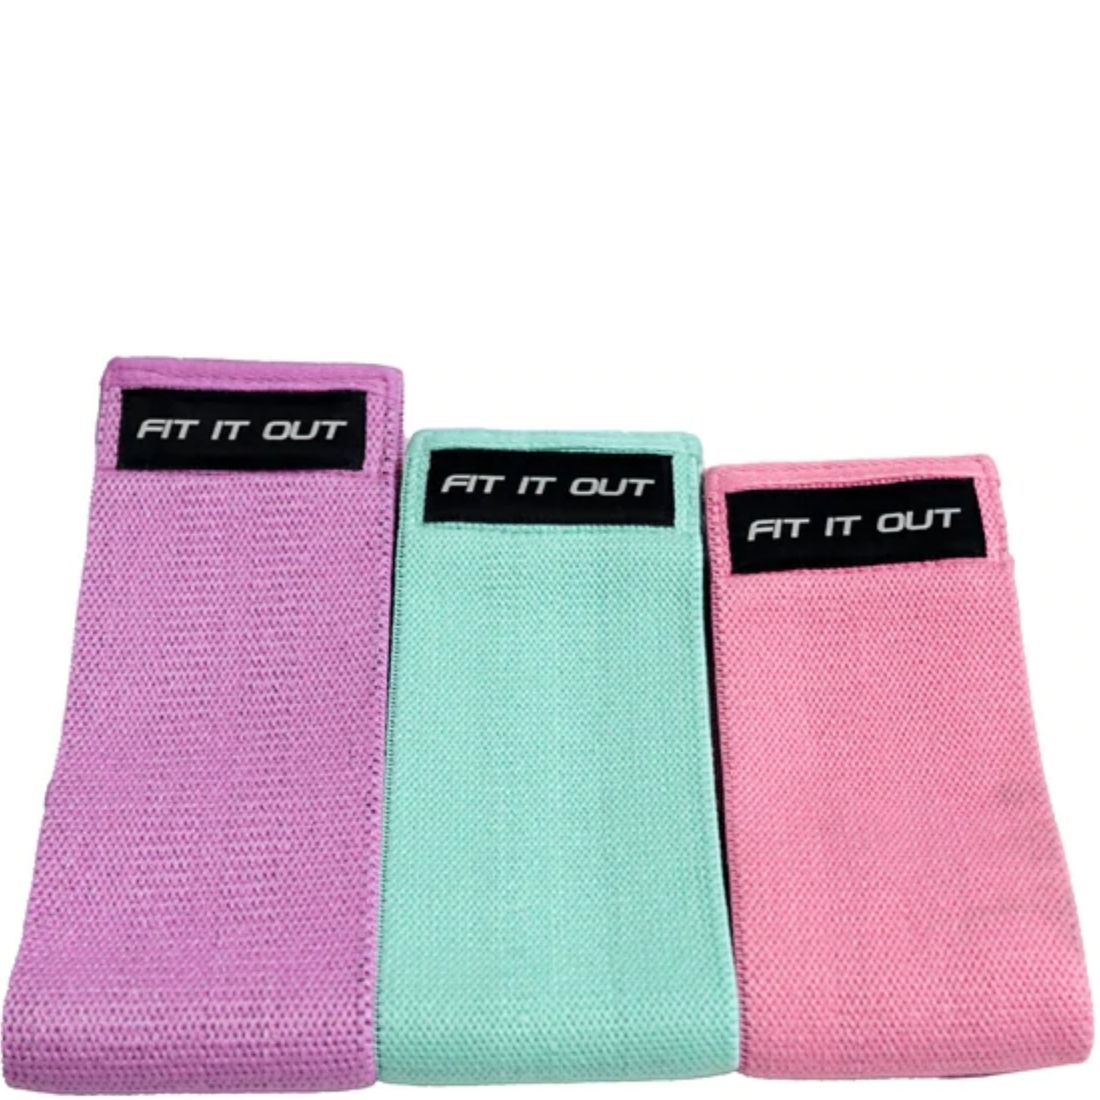 Fit It Out Hip Bands (set of 3)